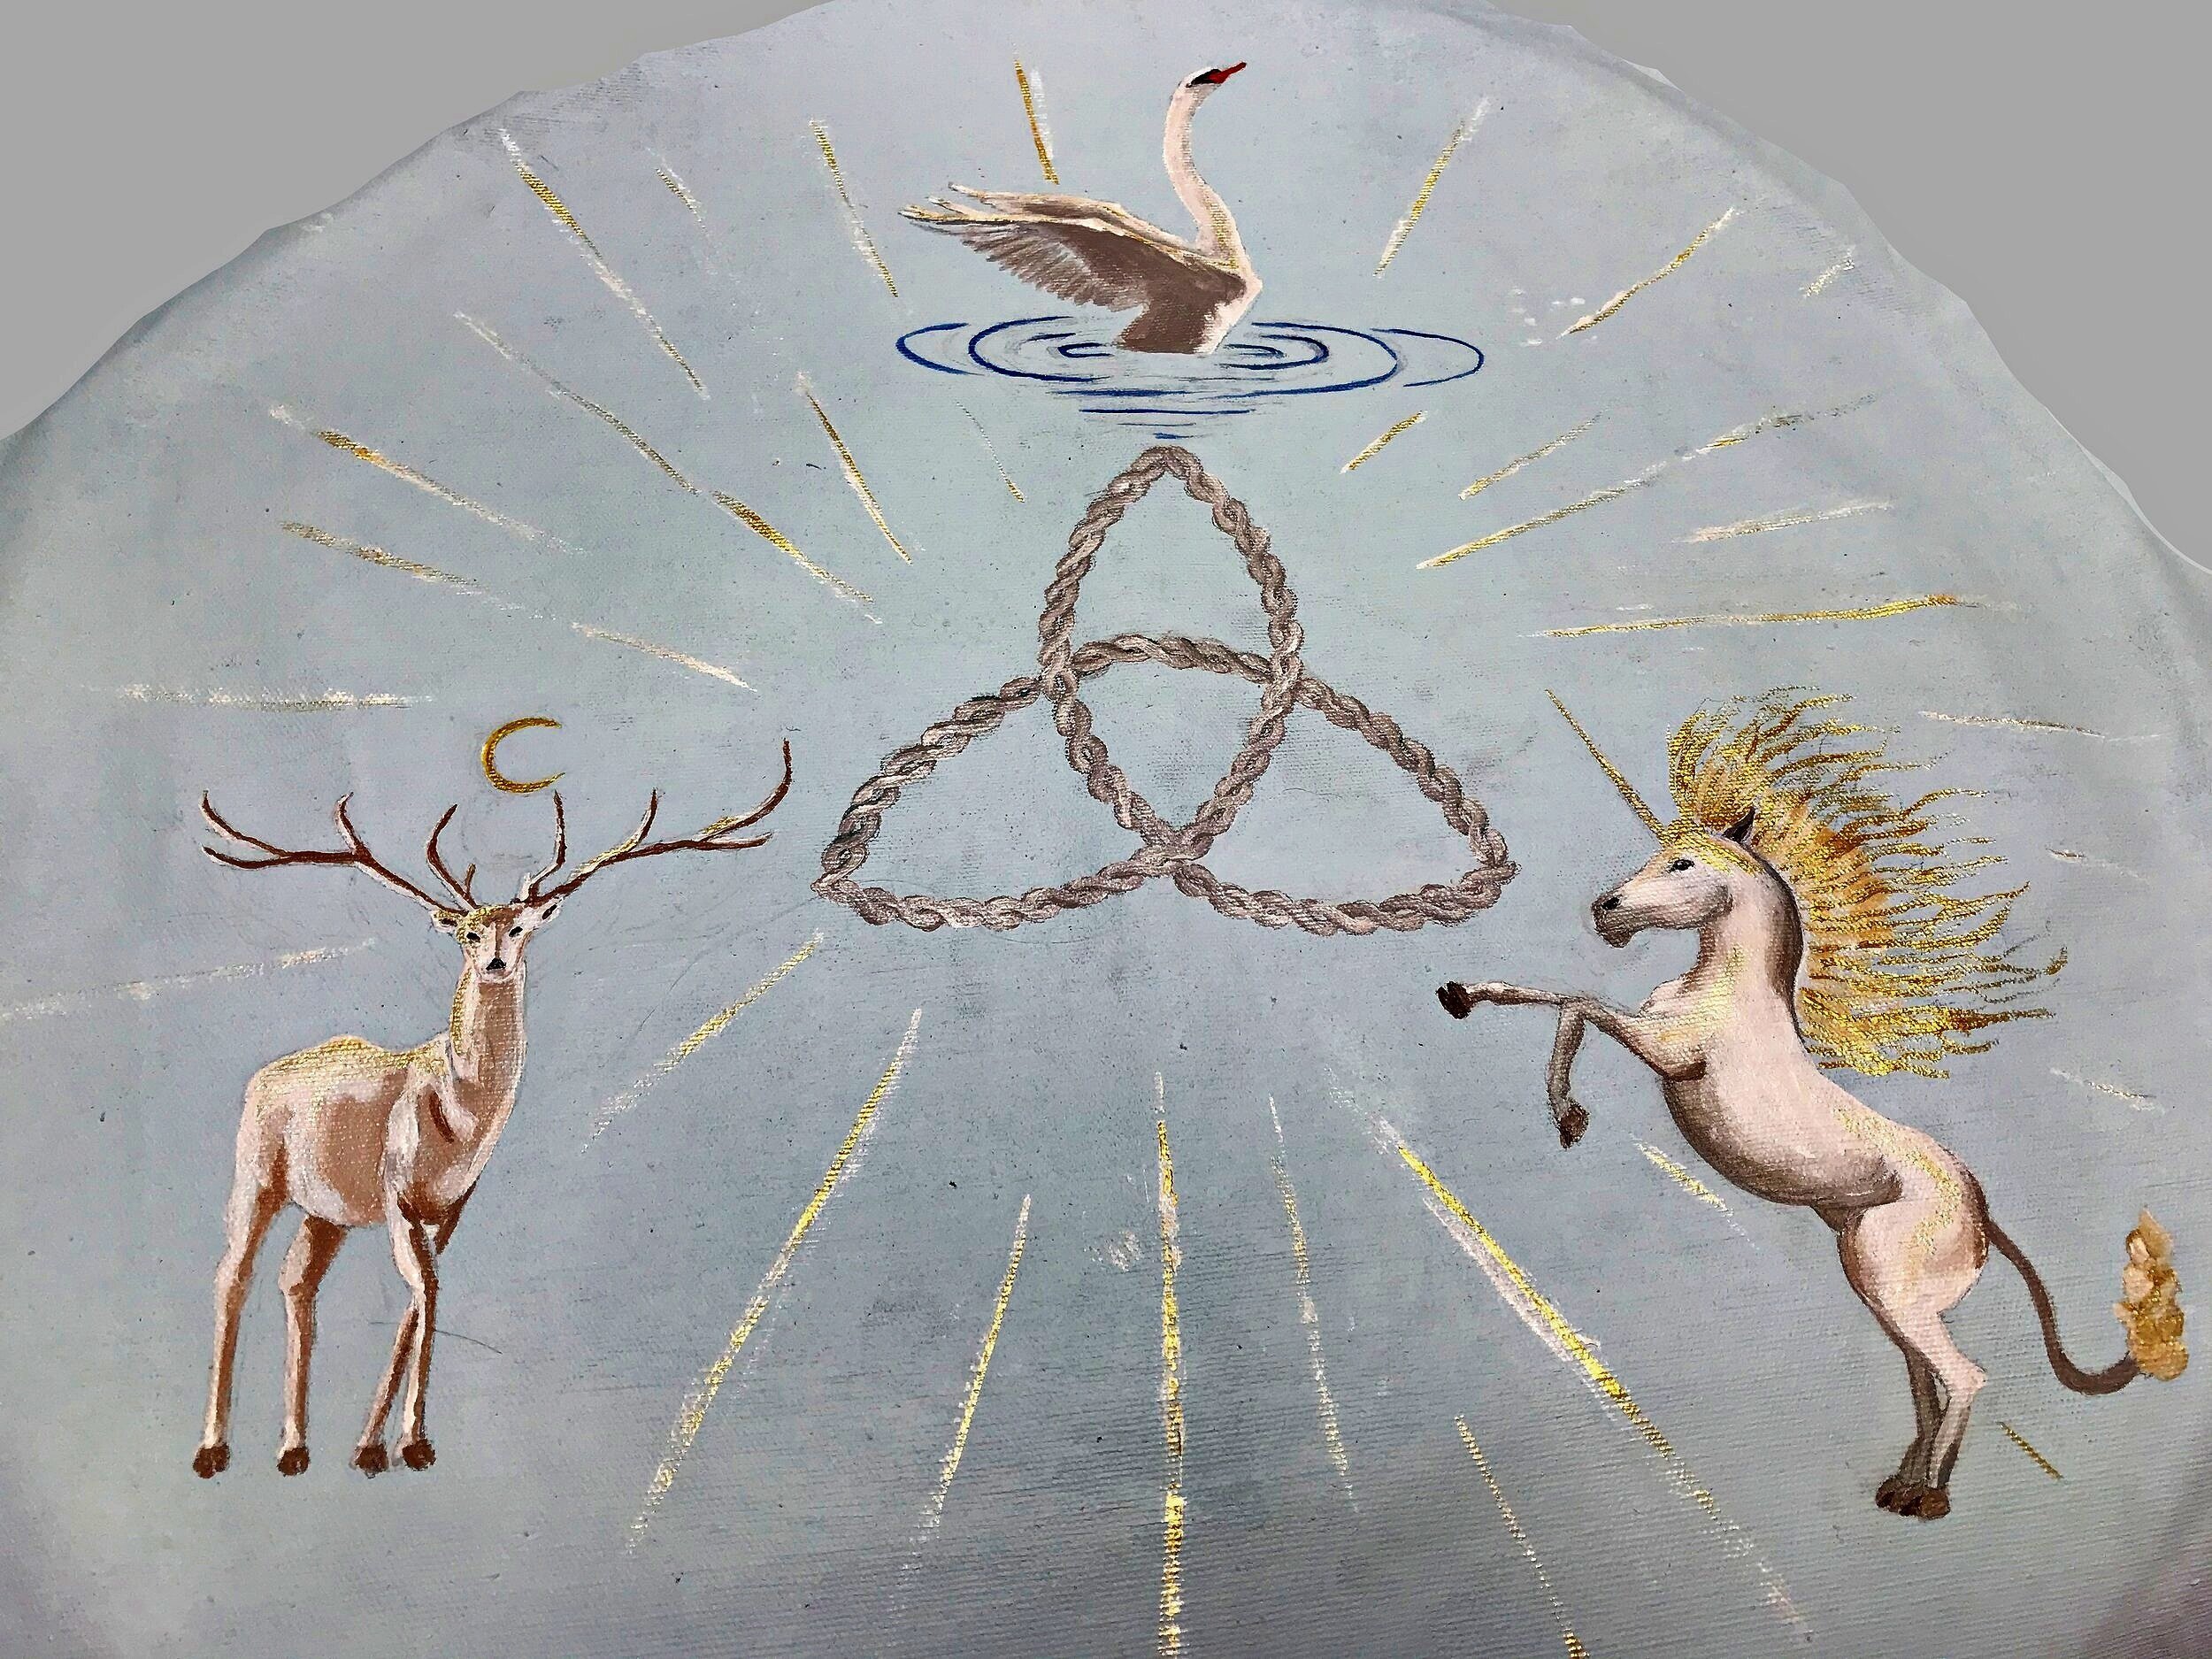  A shield depicting spirit animals for a friend 